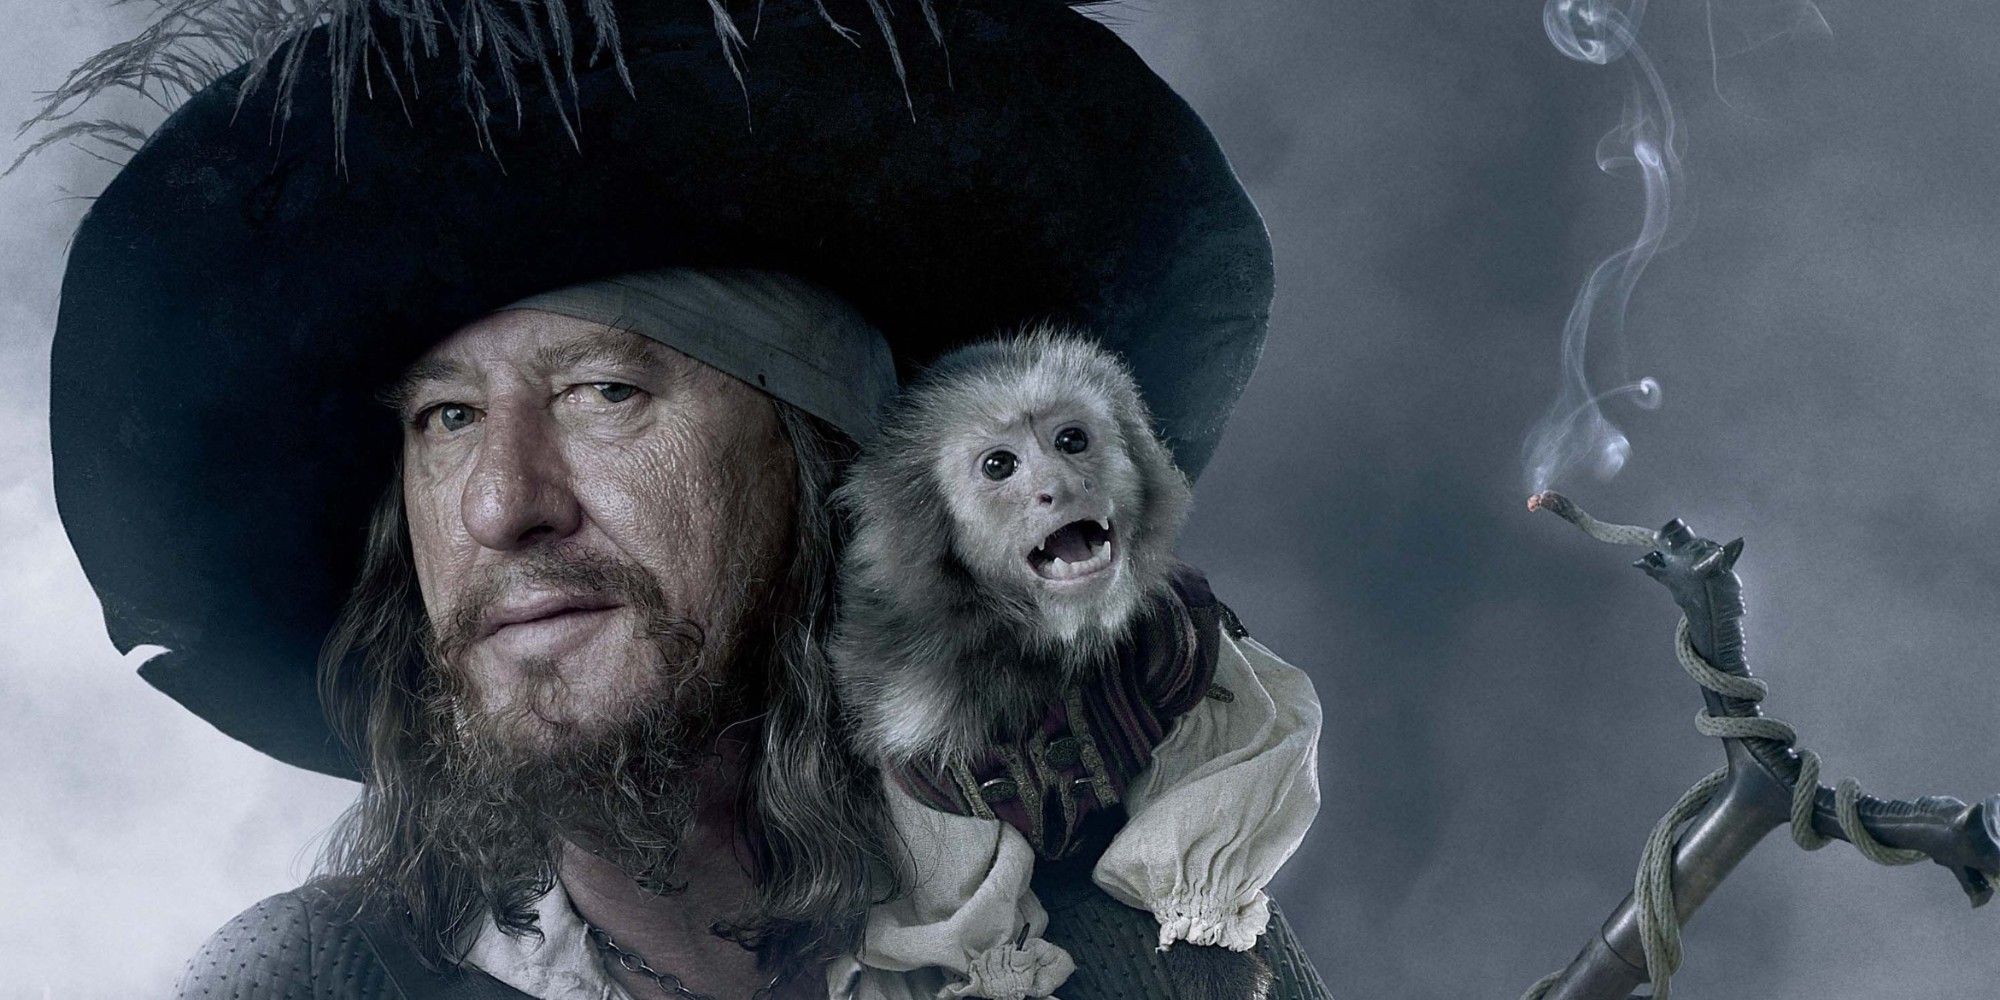 Barbossa and Jack the Monkey from Pirates of the Caribbean